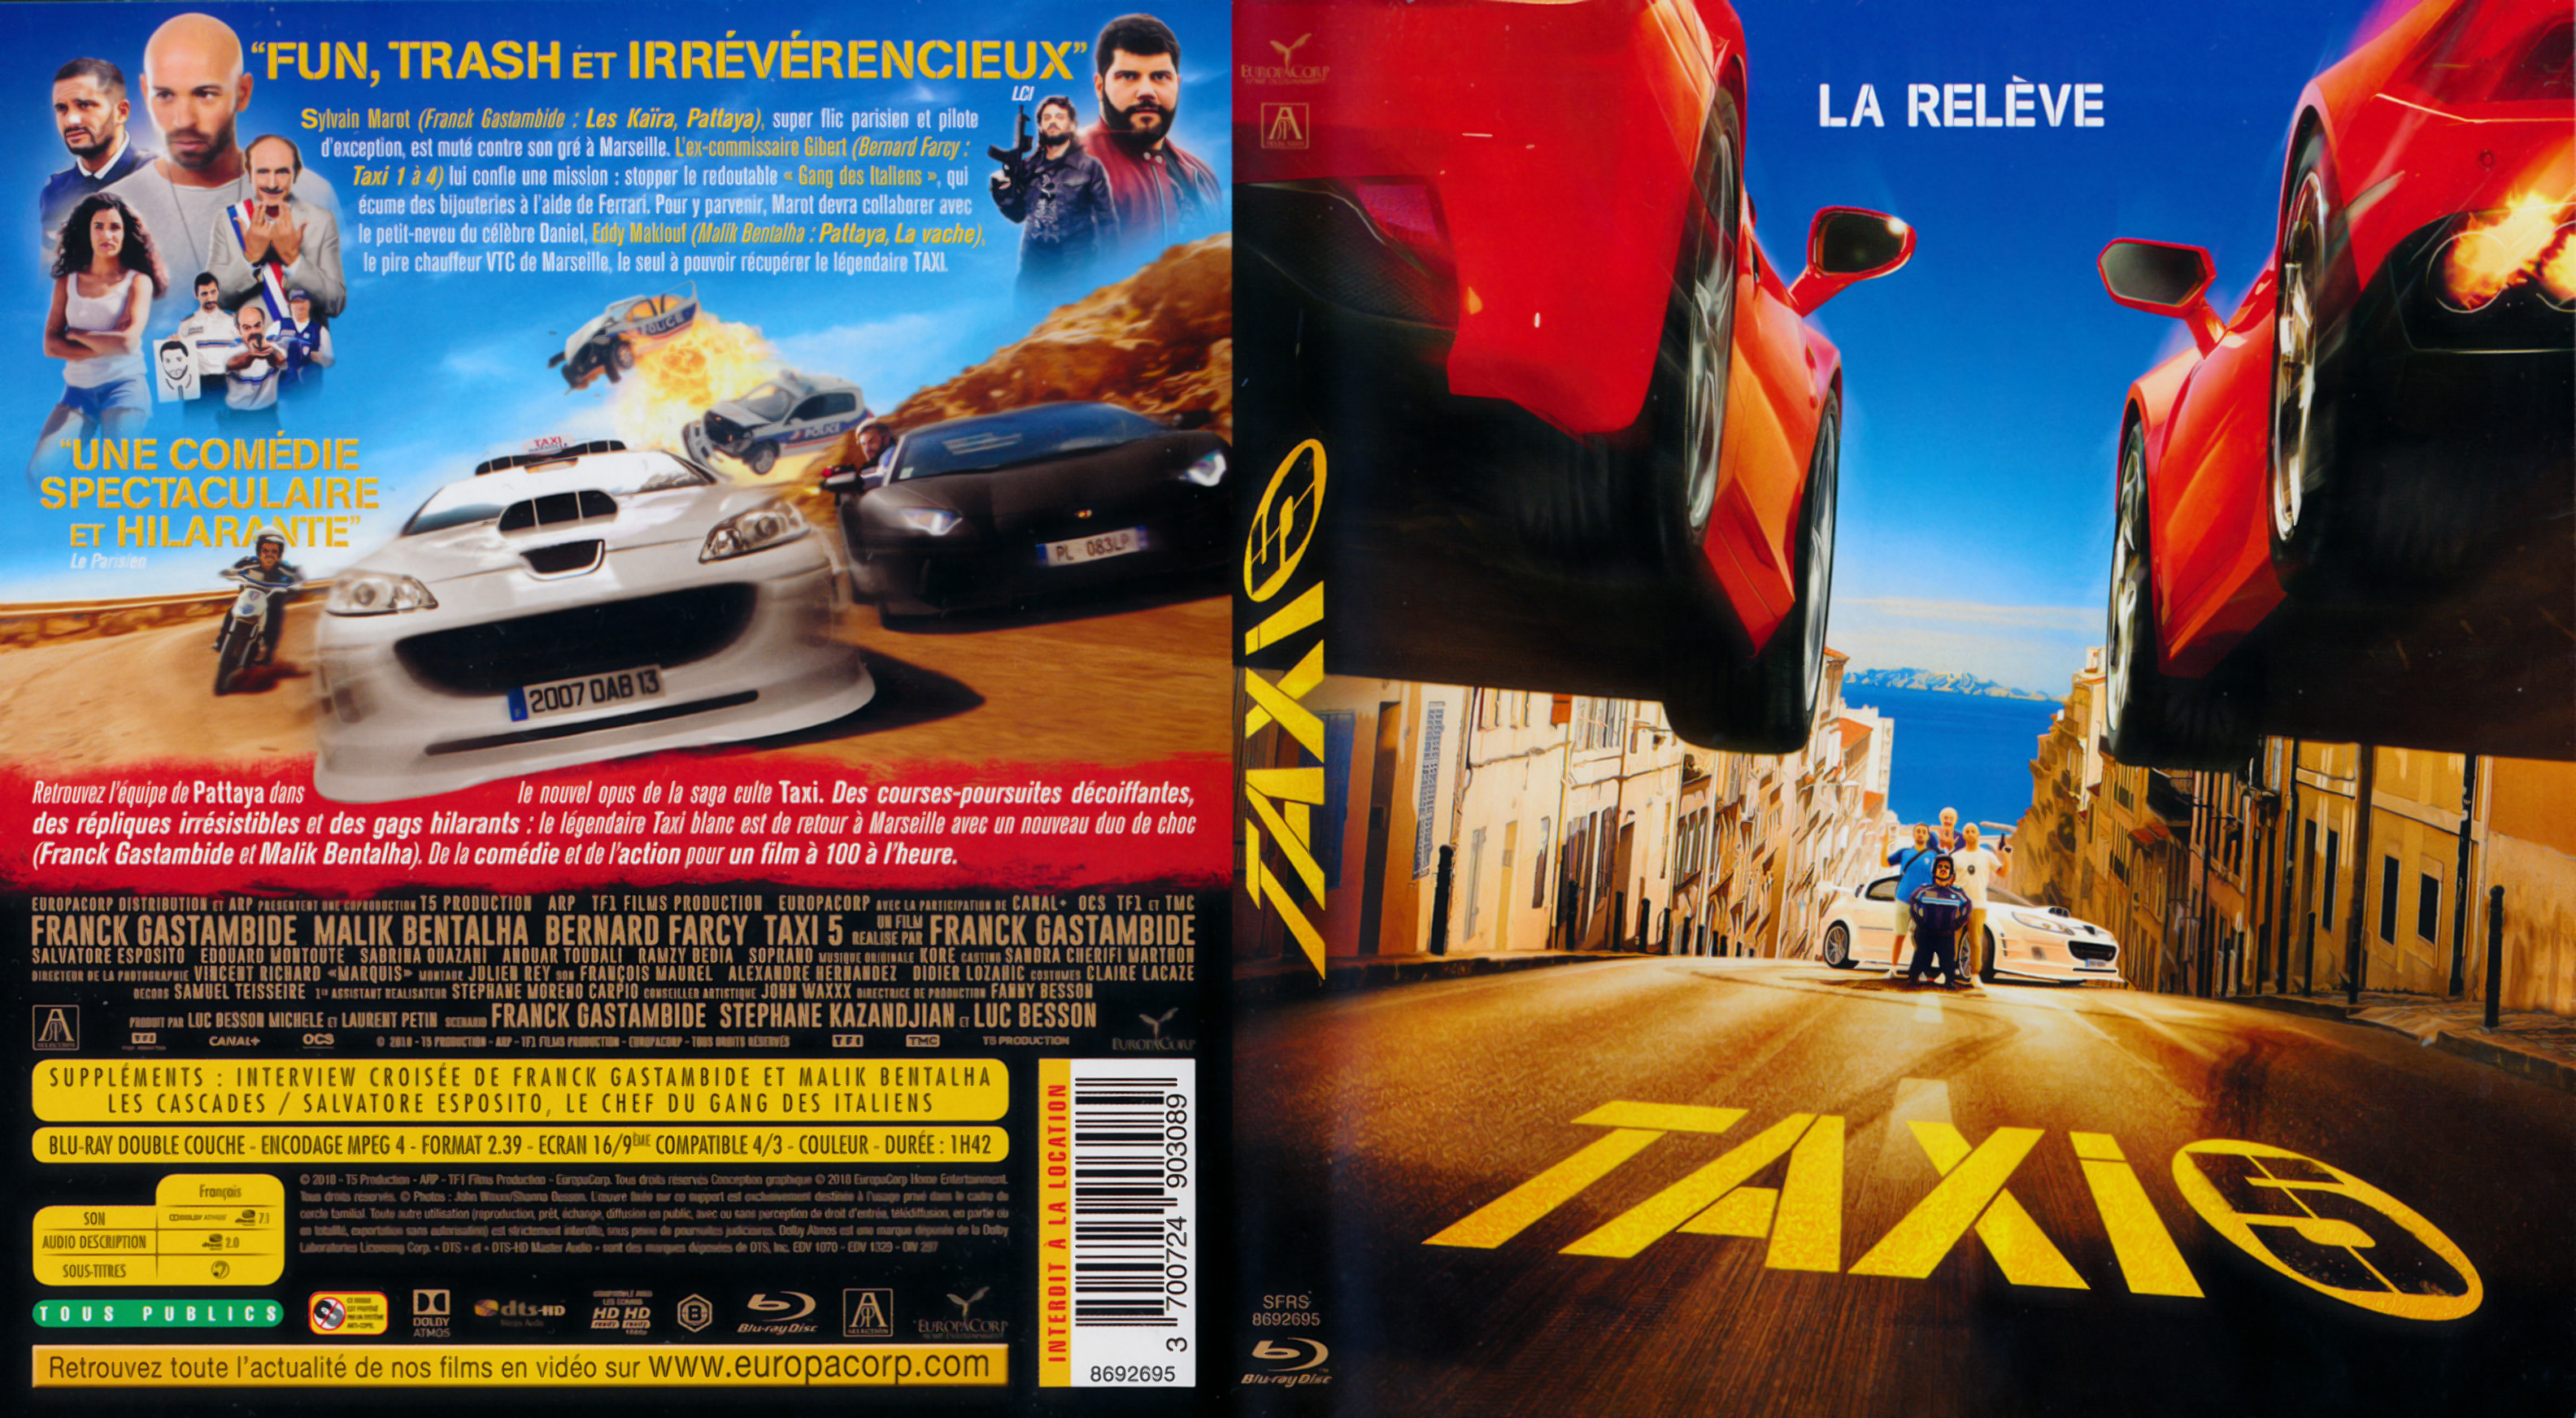 Jaquette DVD Taxi 5 (BLU-RAY)